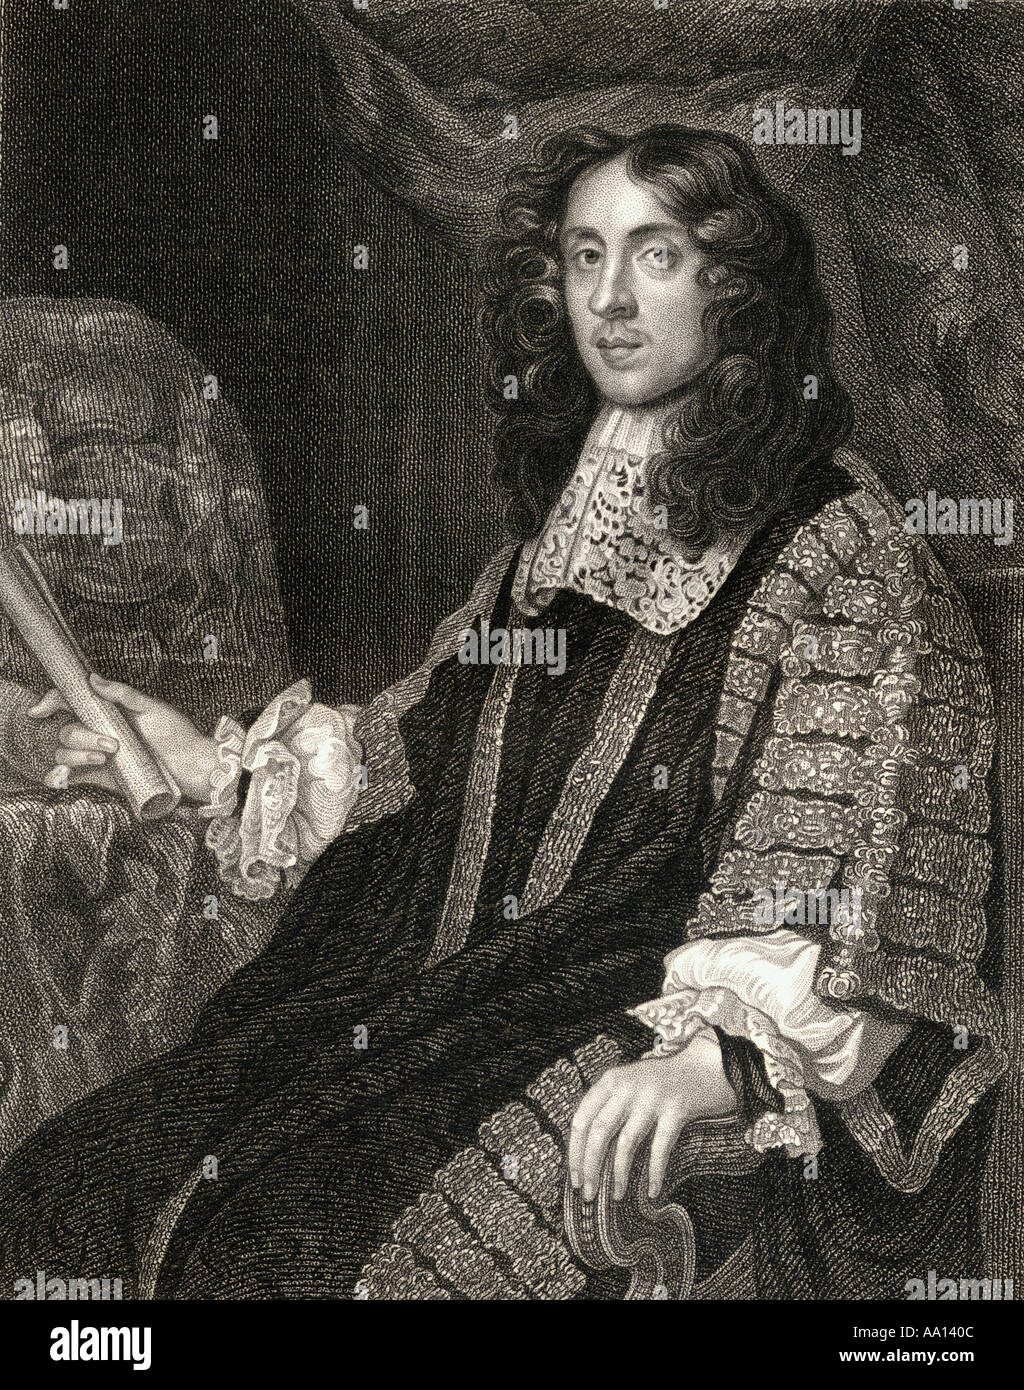 Heneage Finch, 1st Earl of Nottingham, Baron Finch of Daventry, 1621 -1682.  Lord chancellor of England. Stock Photo